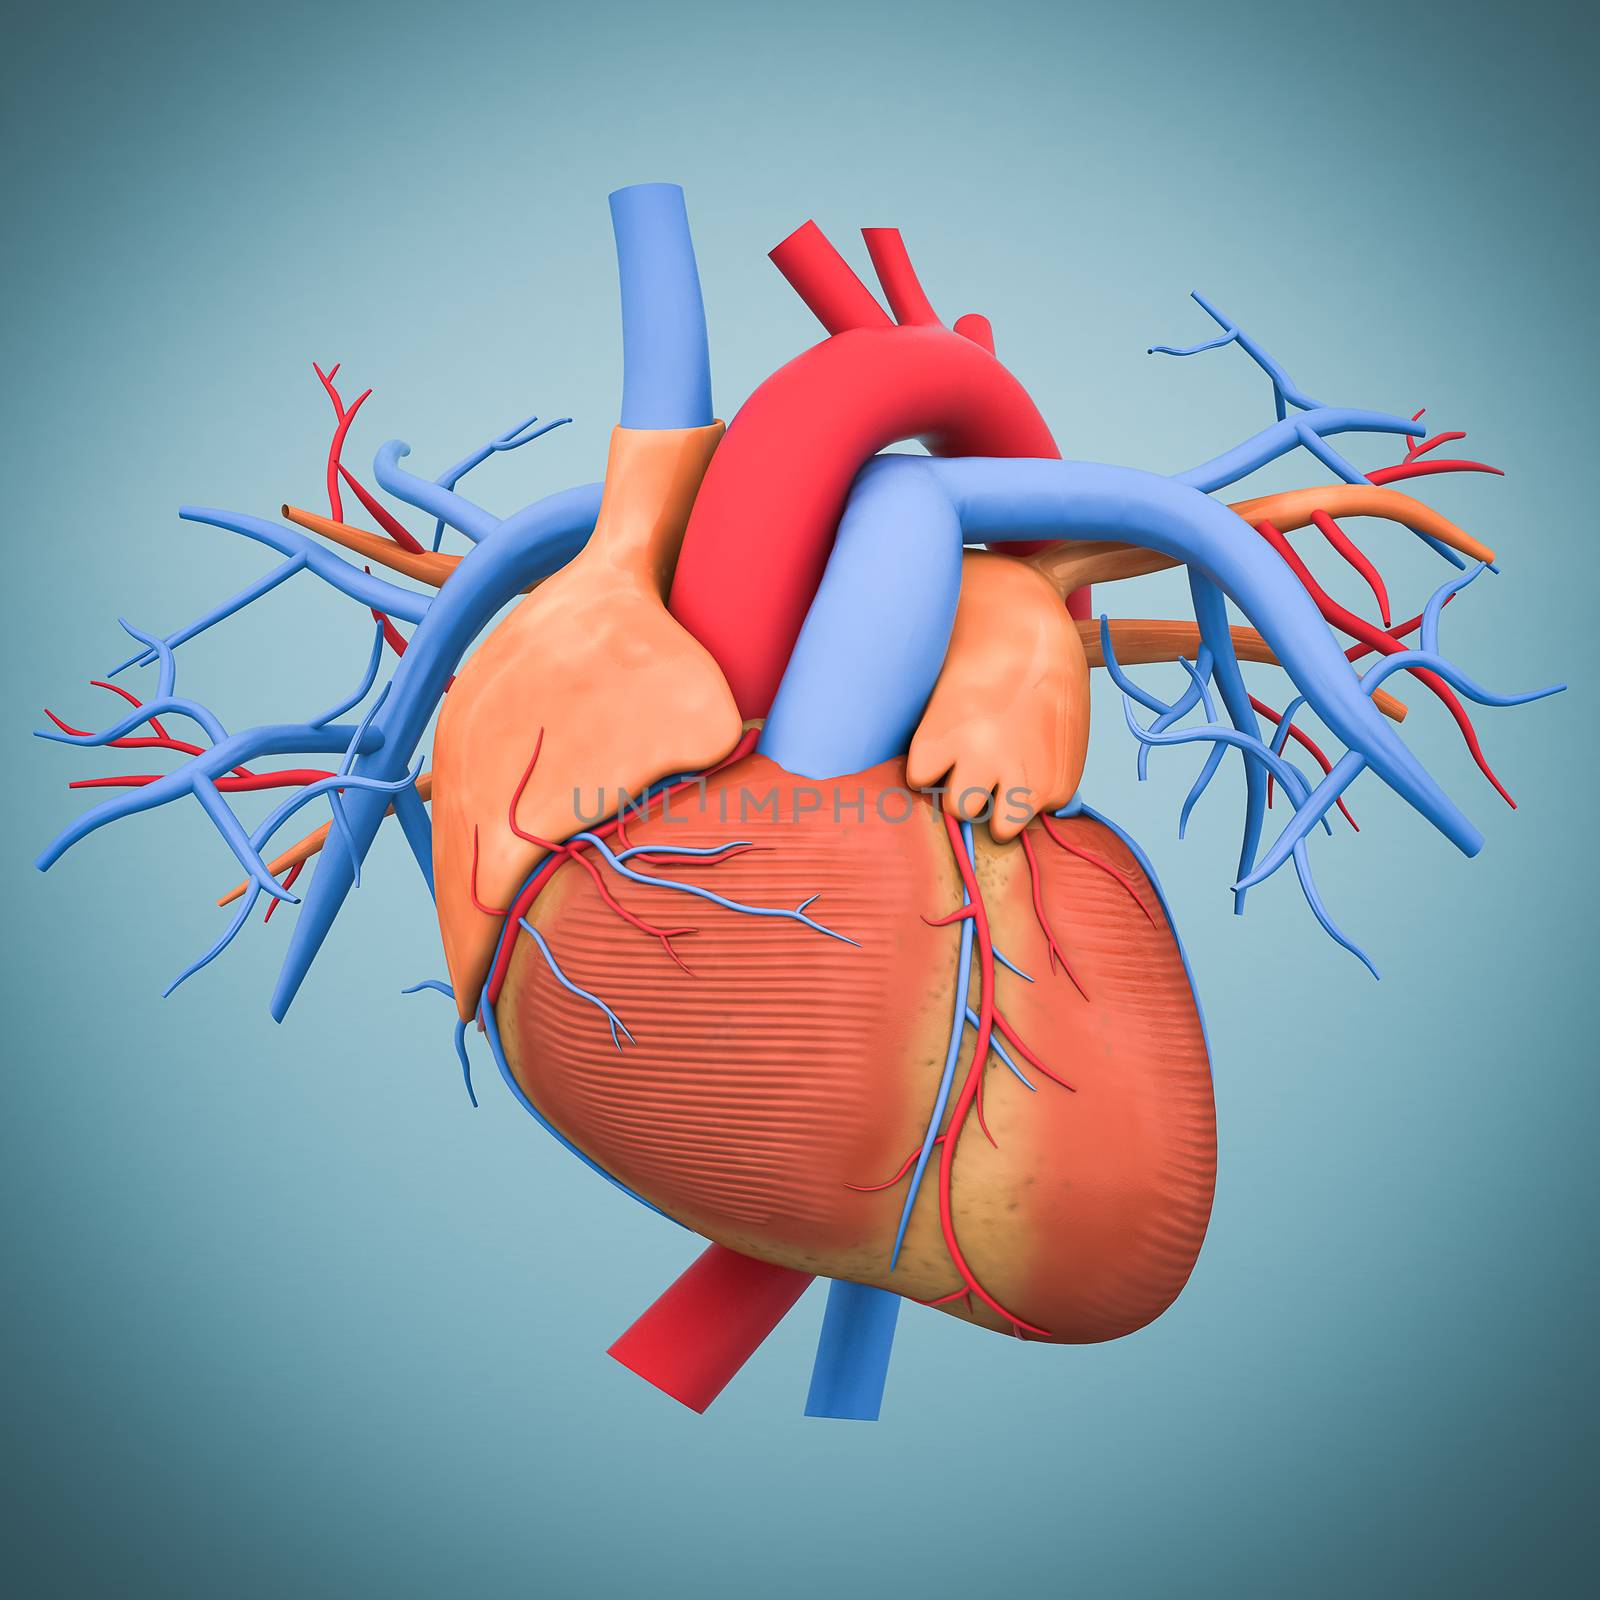 model of heart isolated on blue background